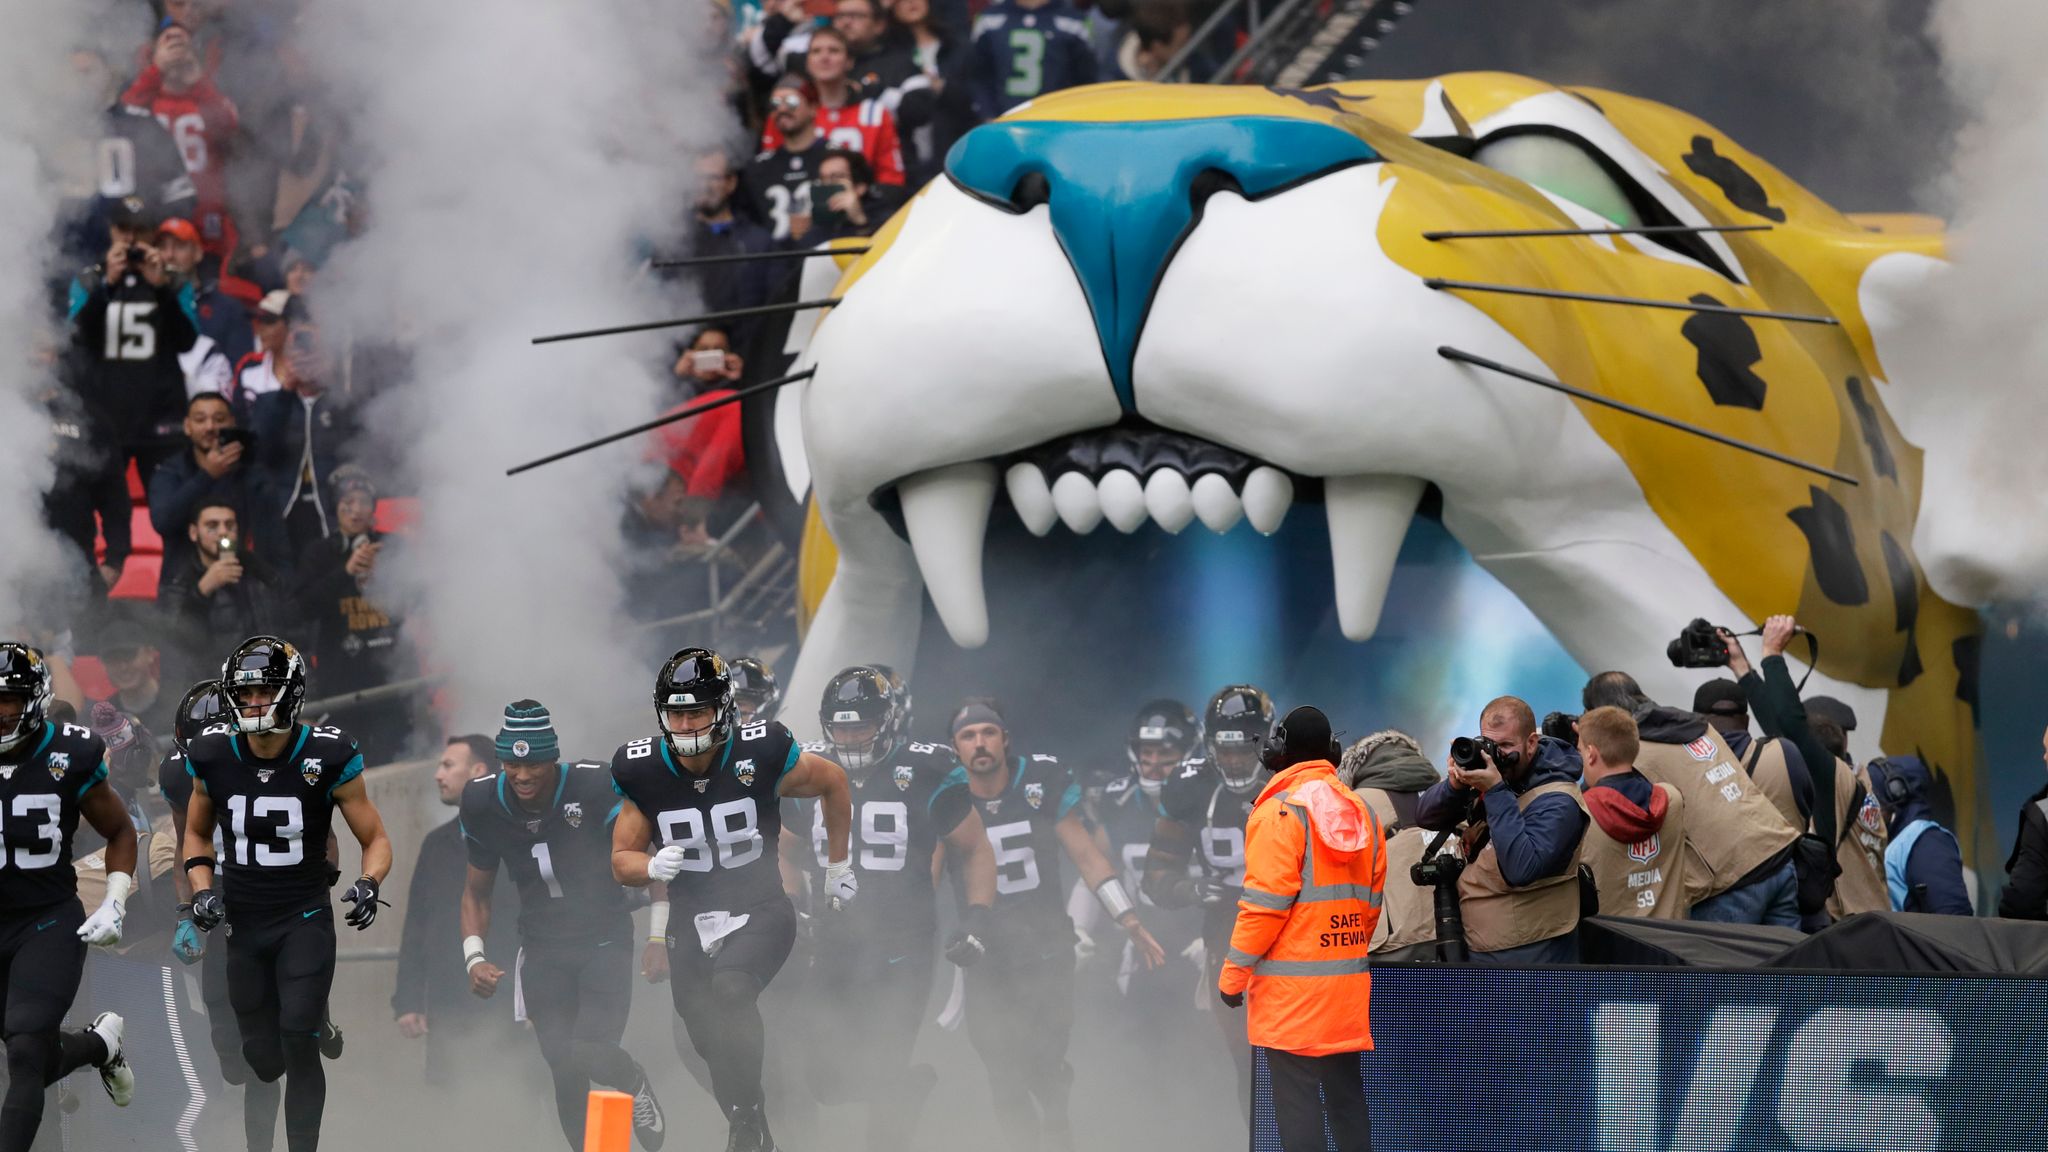 Jaguars Preseason Schedule 2022 Nfl Hopeful Of Wembley Return For Jacksonville Jaguars In 2022; League Also  Excited By Olympics Potential, Says Head Of Europe And Uk Brett Gosper |  Nfl News | Sky Sports